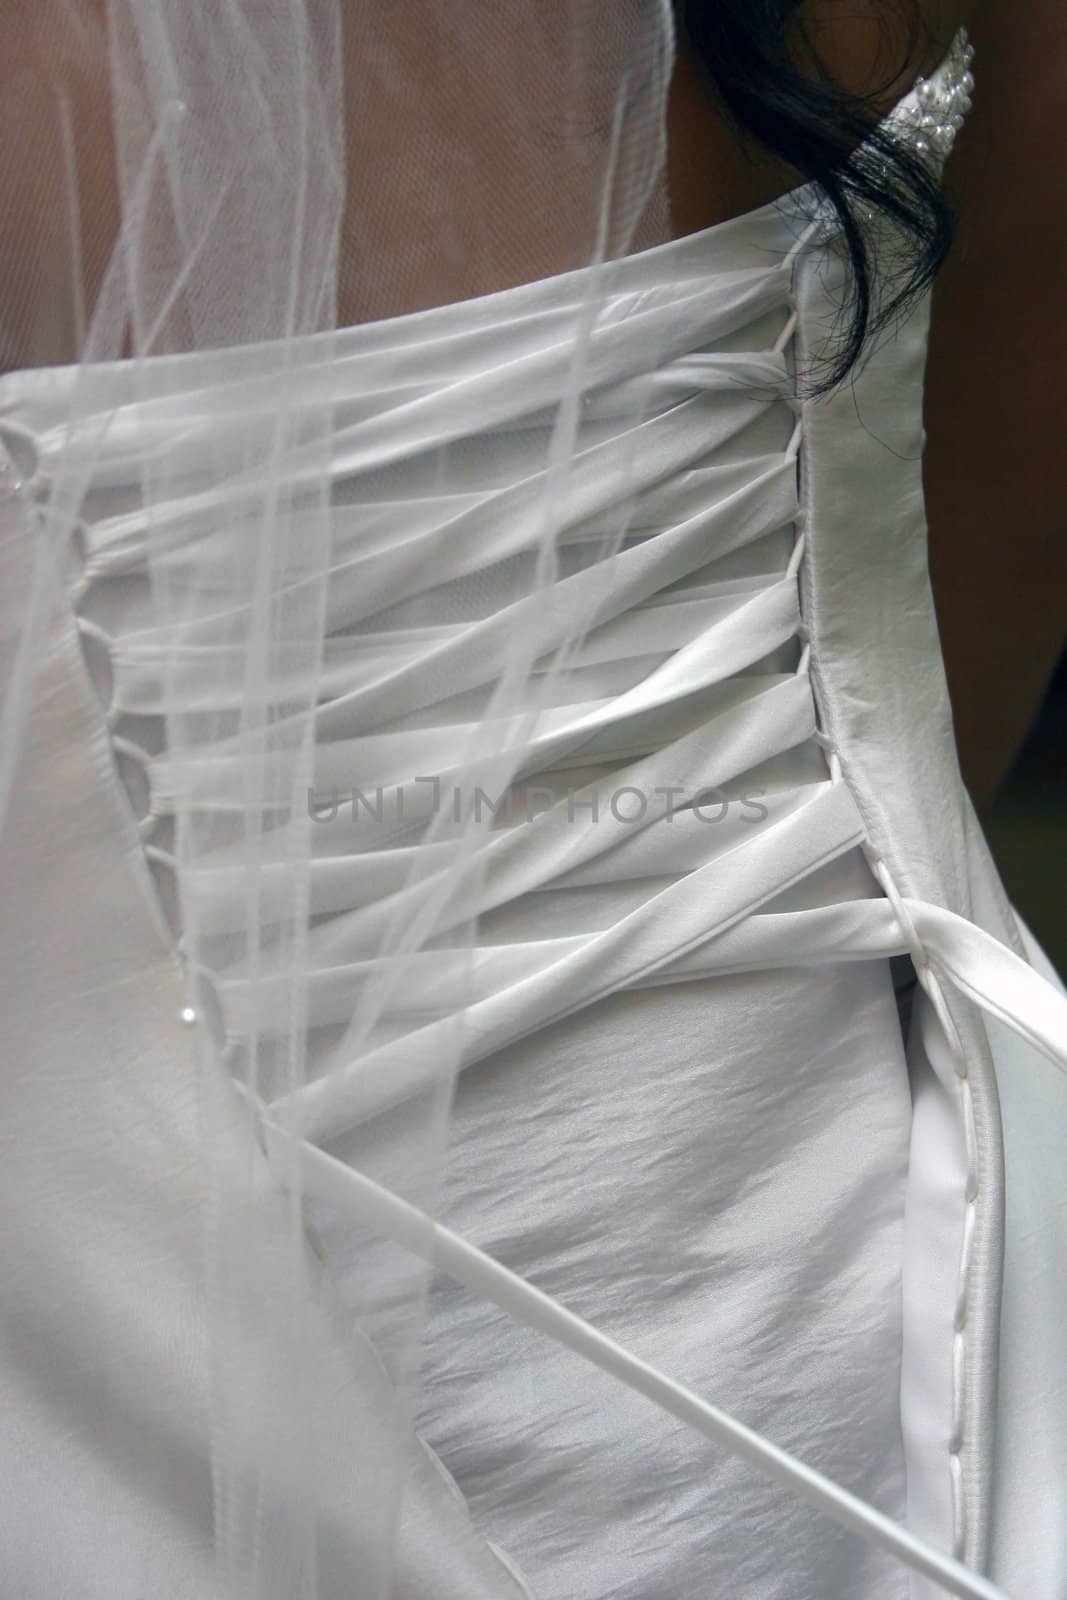 The back of a bride's wedding dress while she is getting tied up.